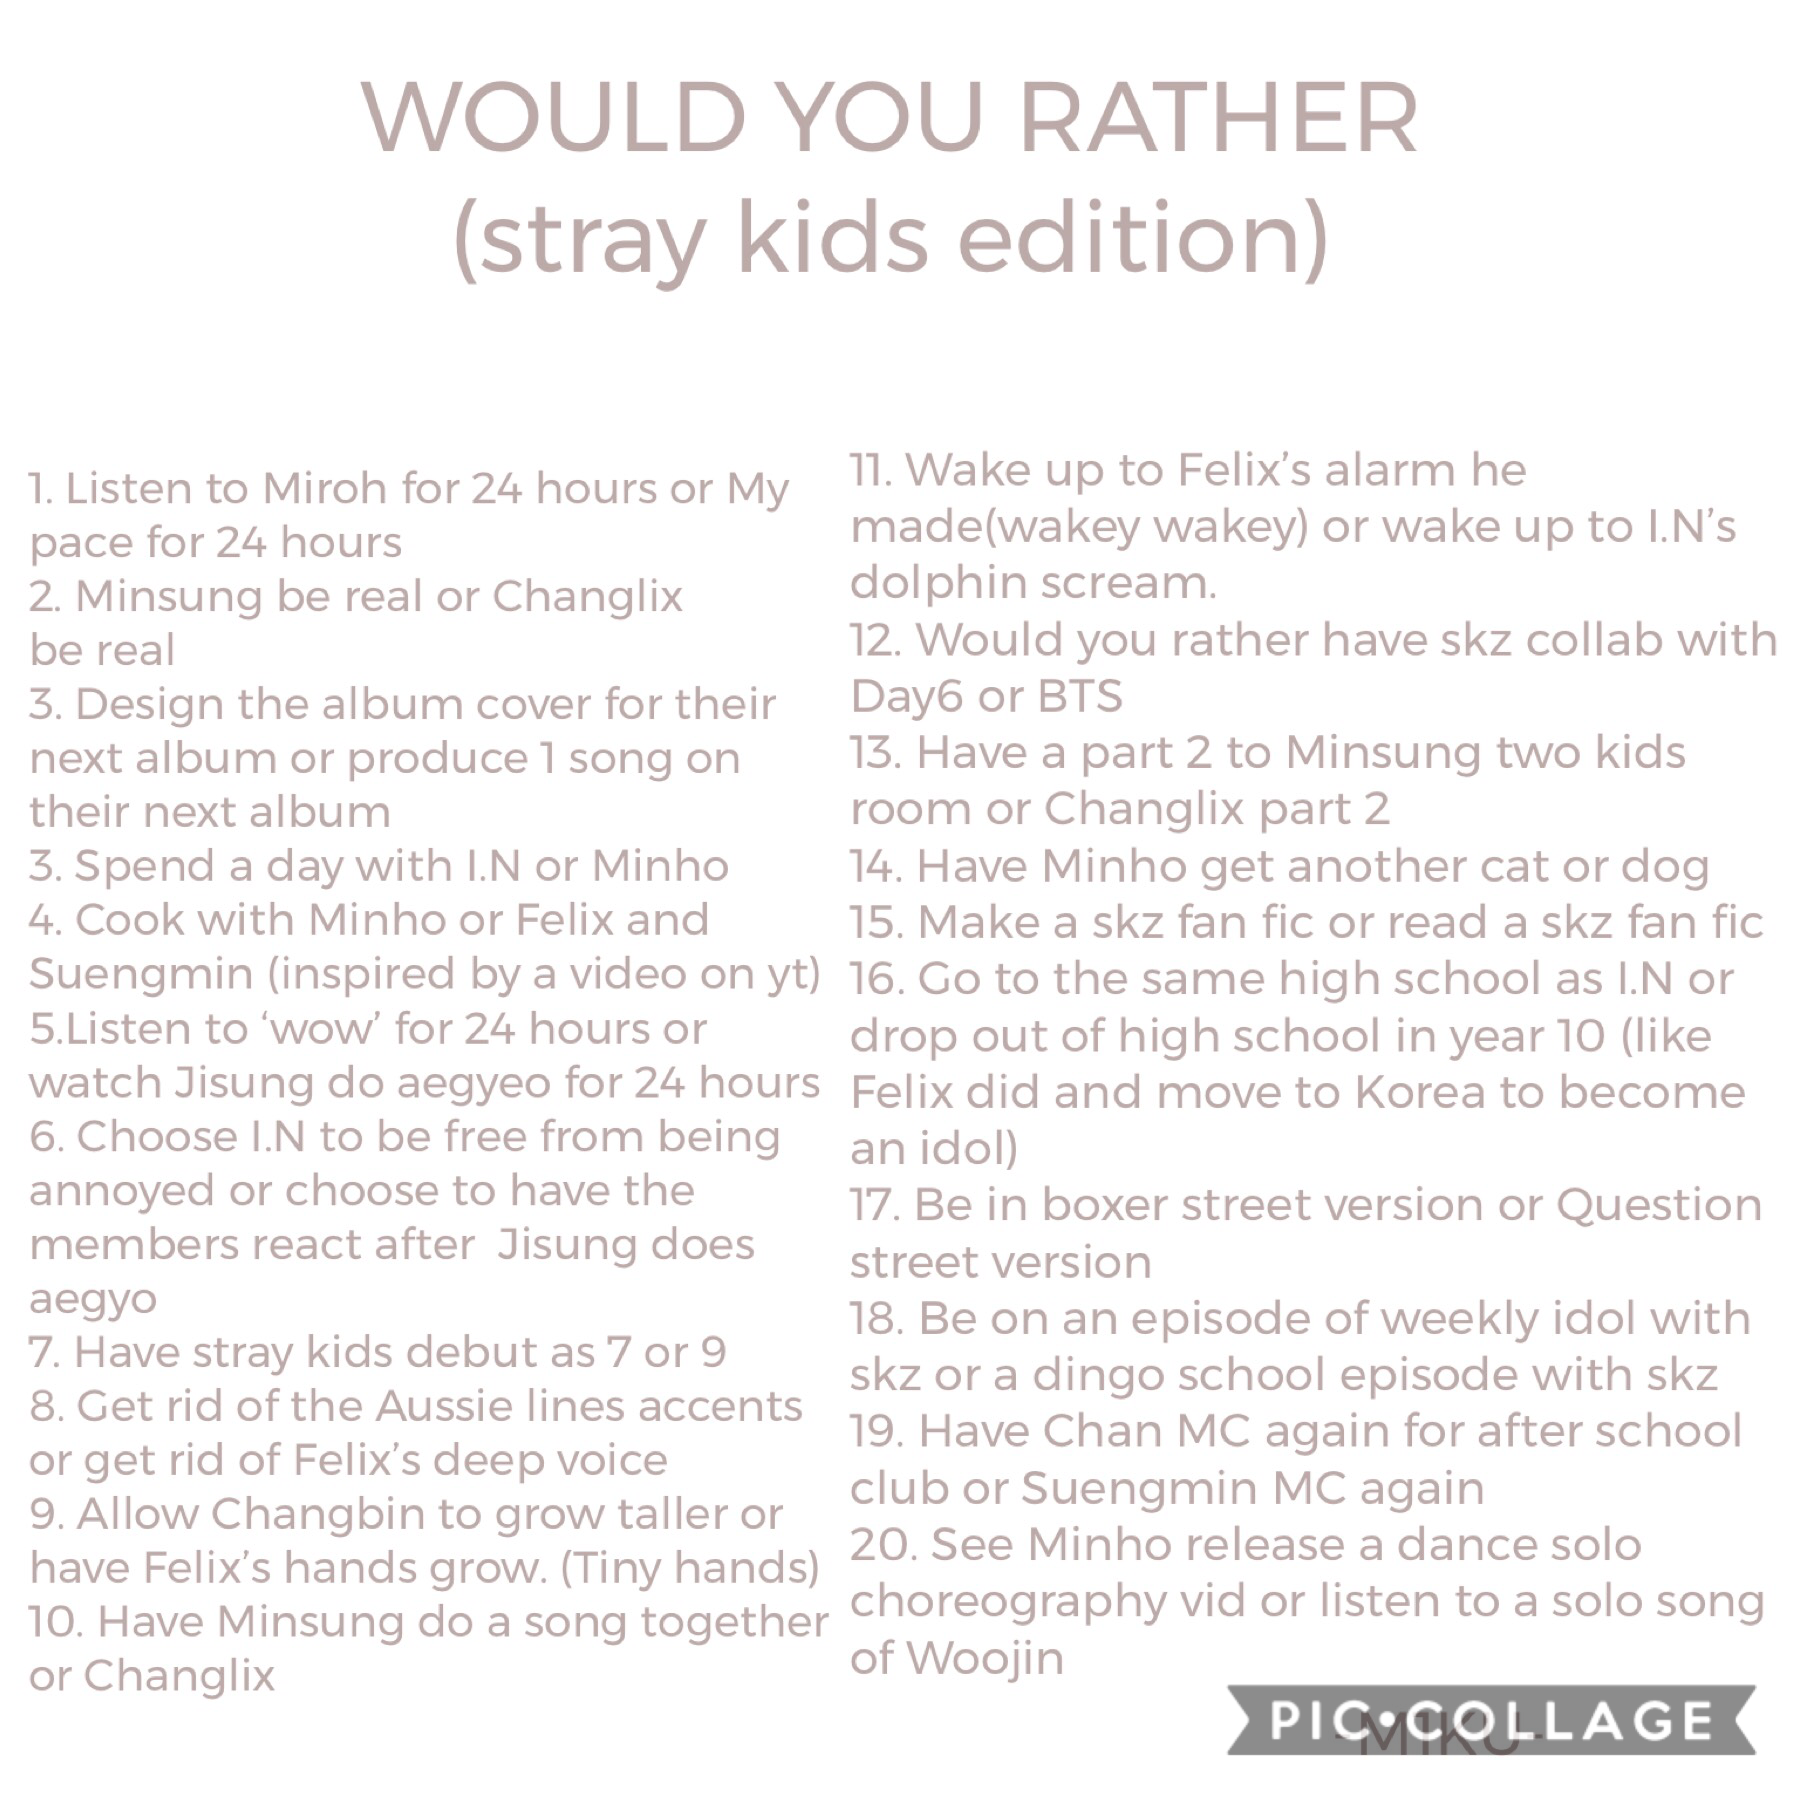 Put your answers in remixes. (I will as well)